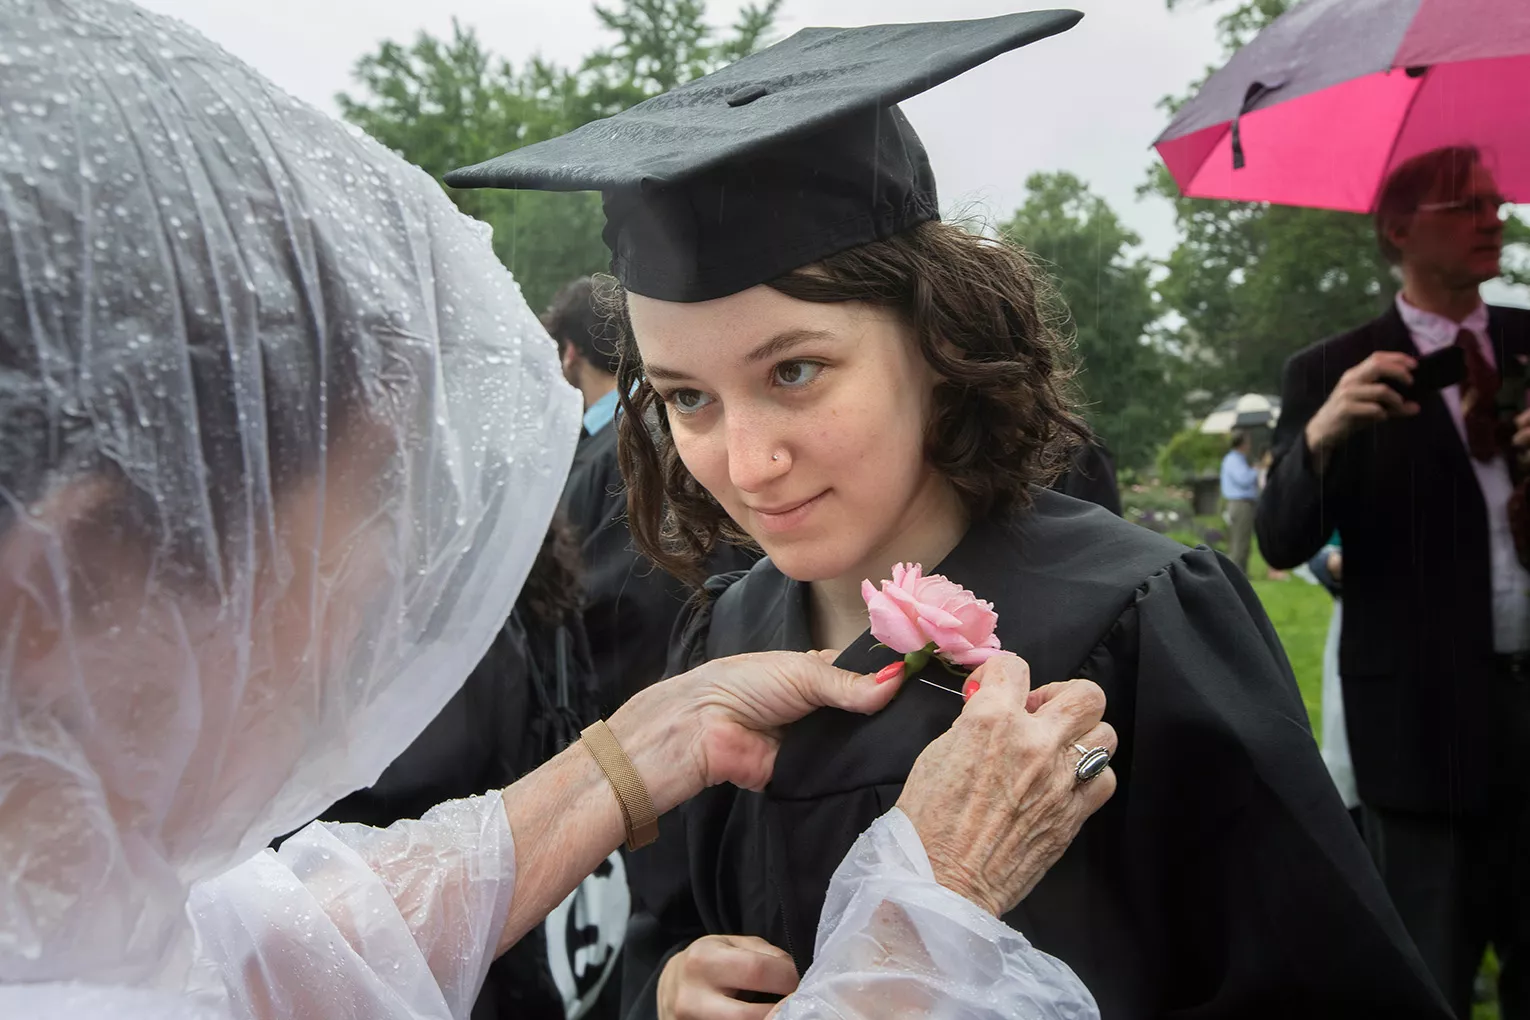 Student receiving rose on lapel at commencement